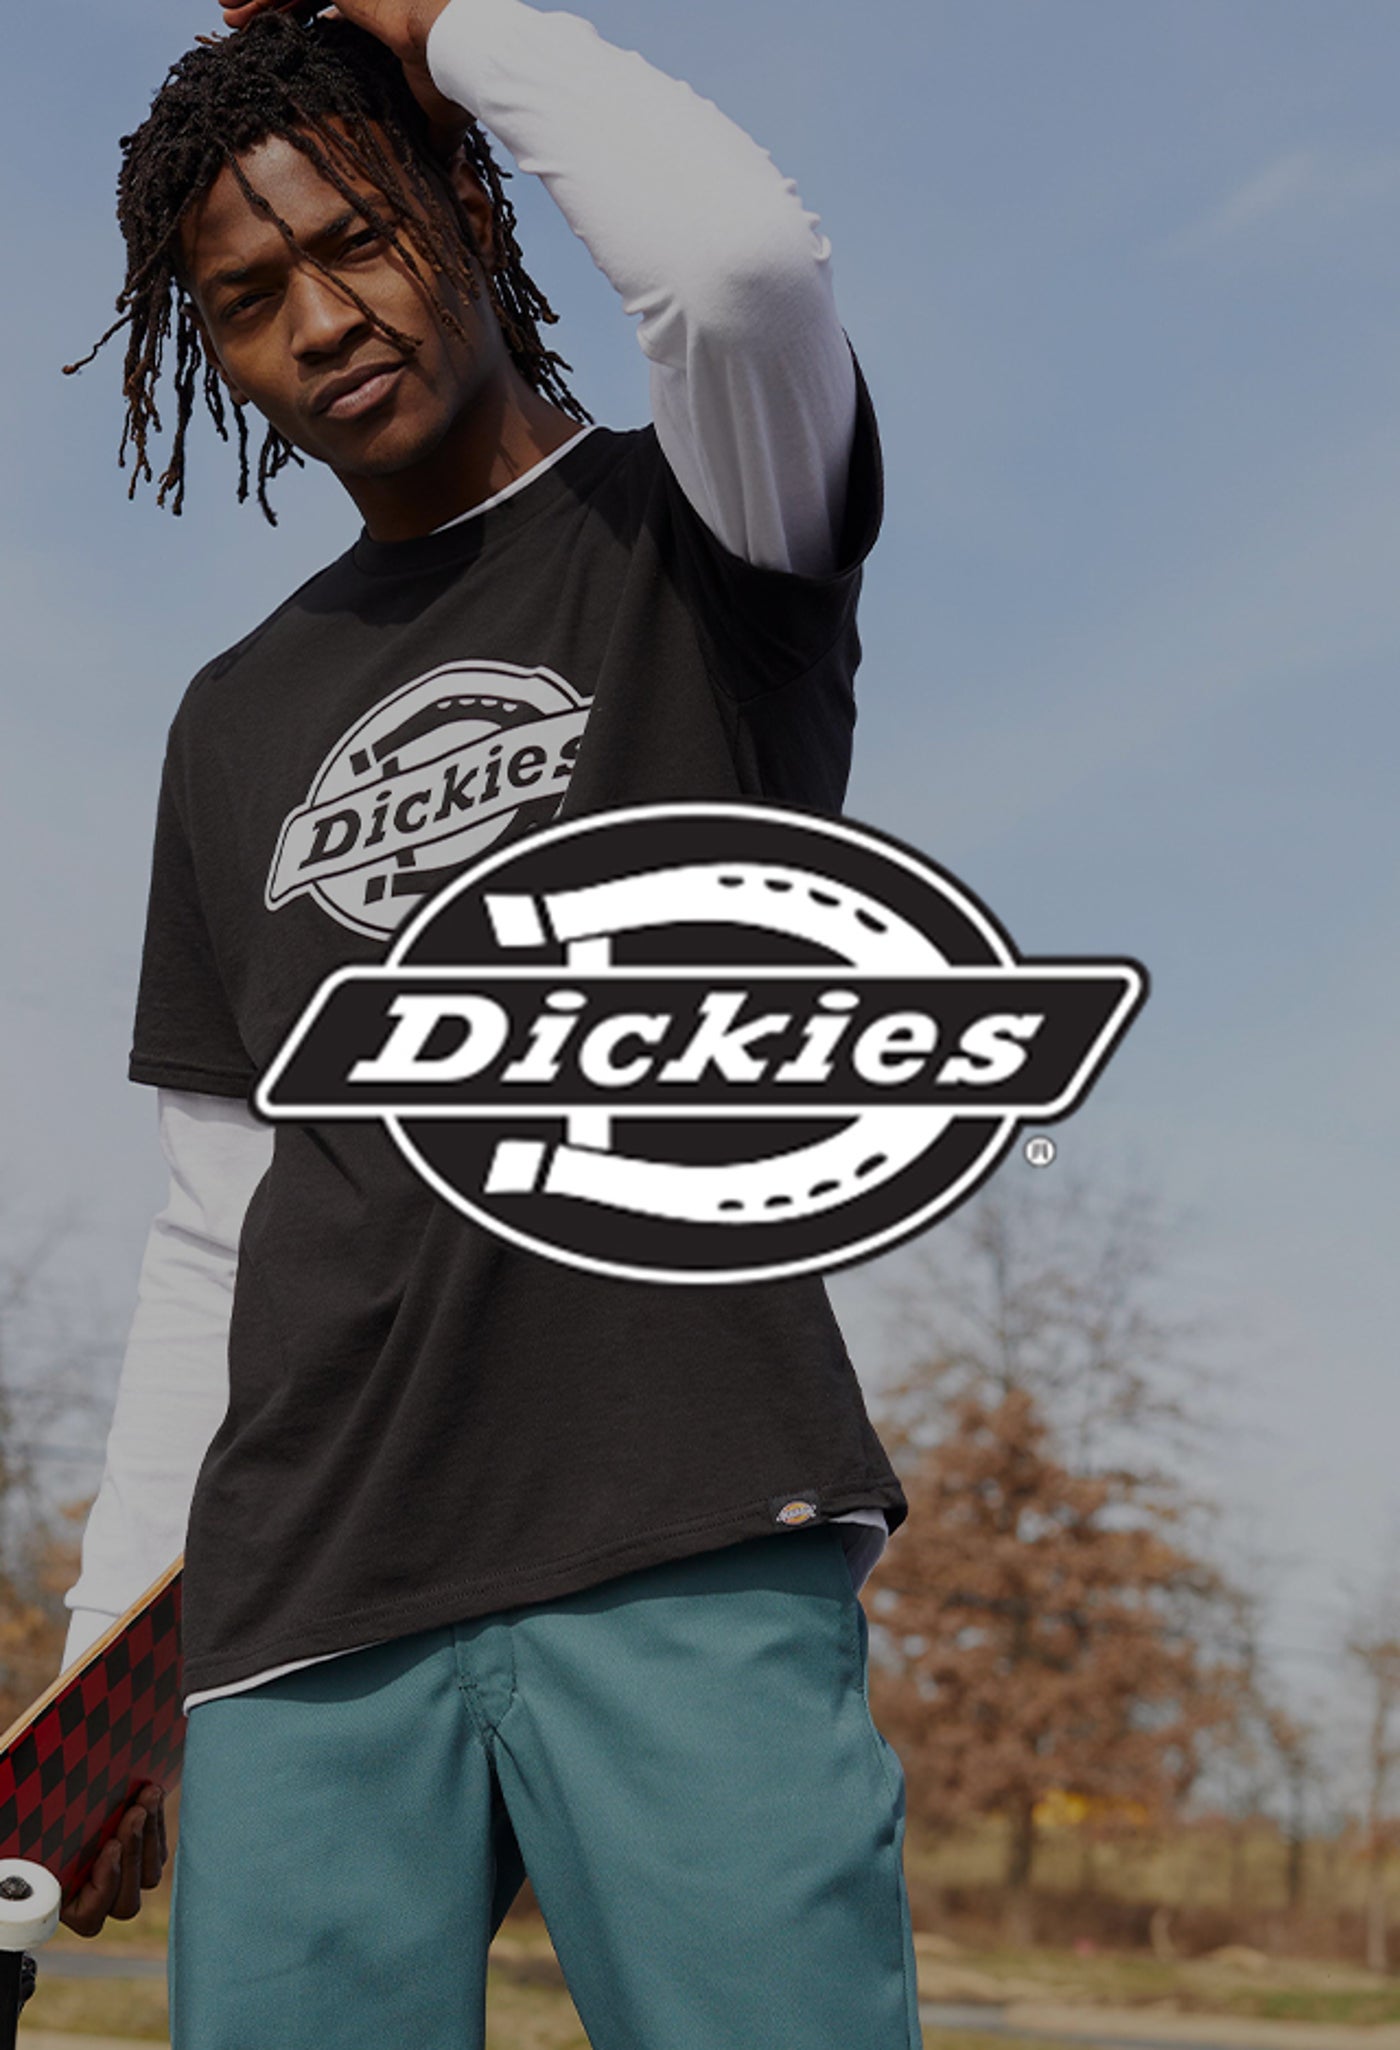 Clothing by Dickies